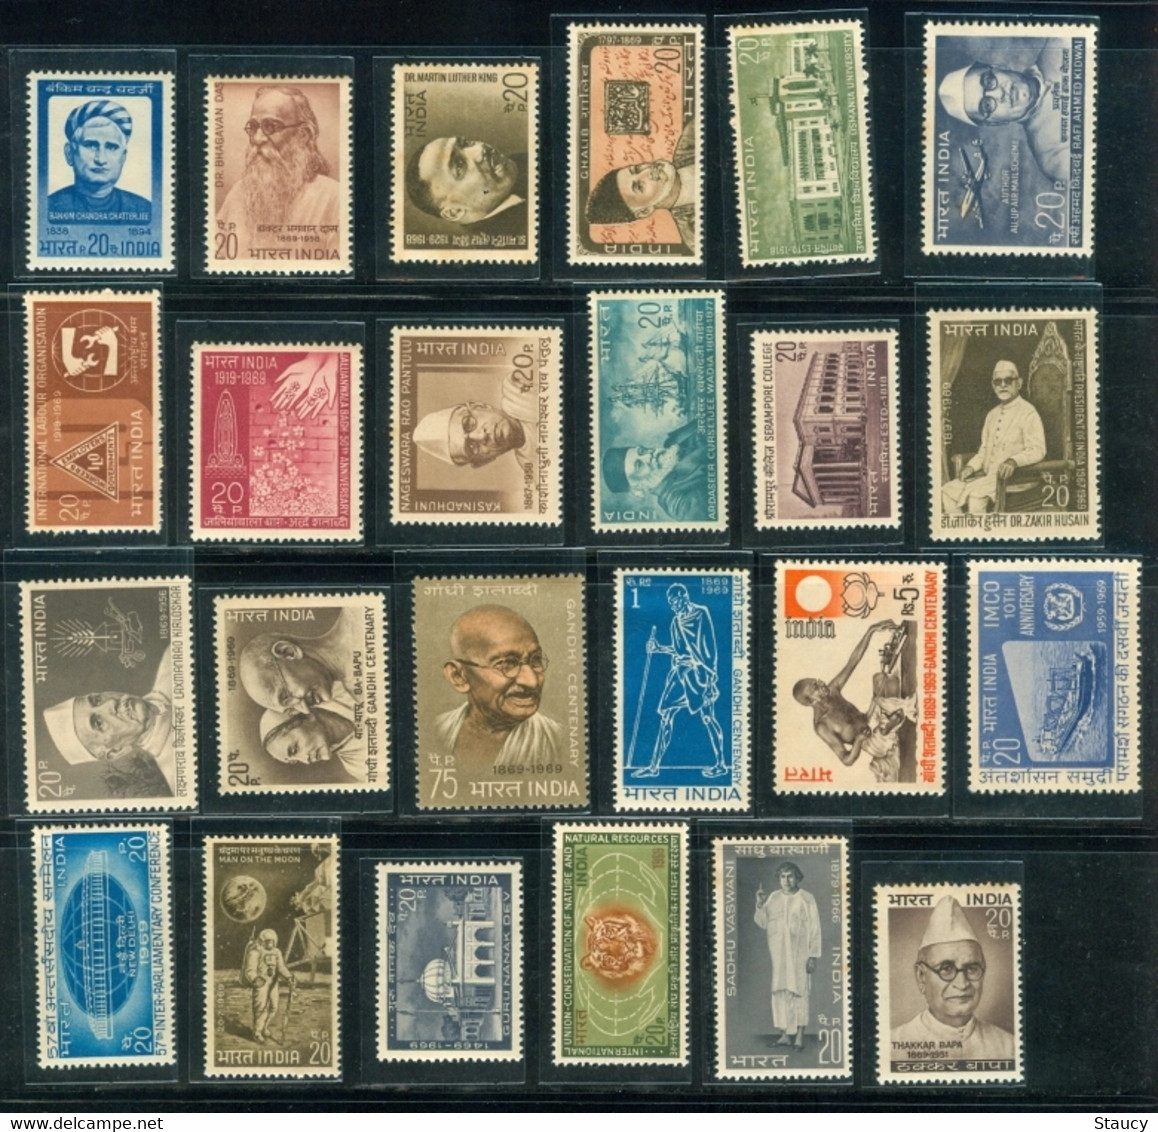 India 1969 Complete Year Pack / Set / Collection Total 24 Stamps (No Missing) MNH As Per Scan - Ongebruikt